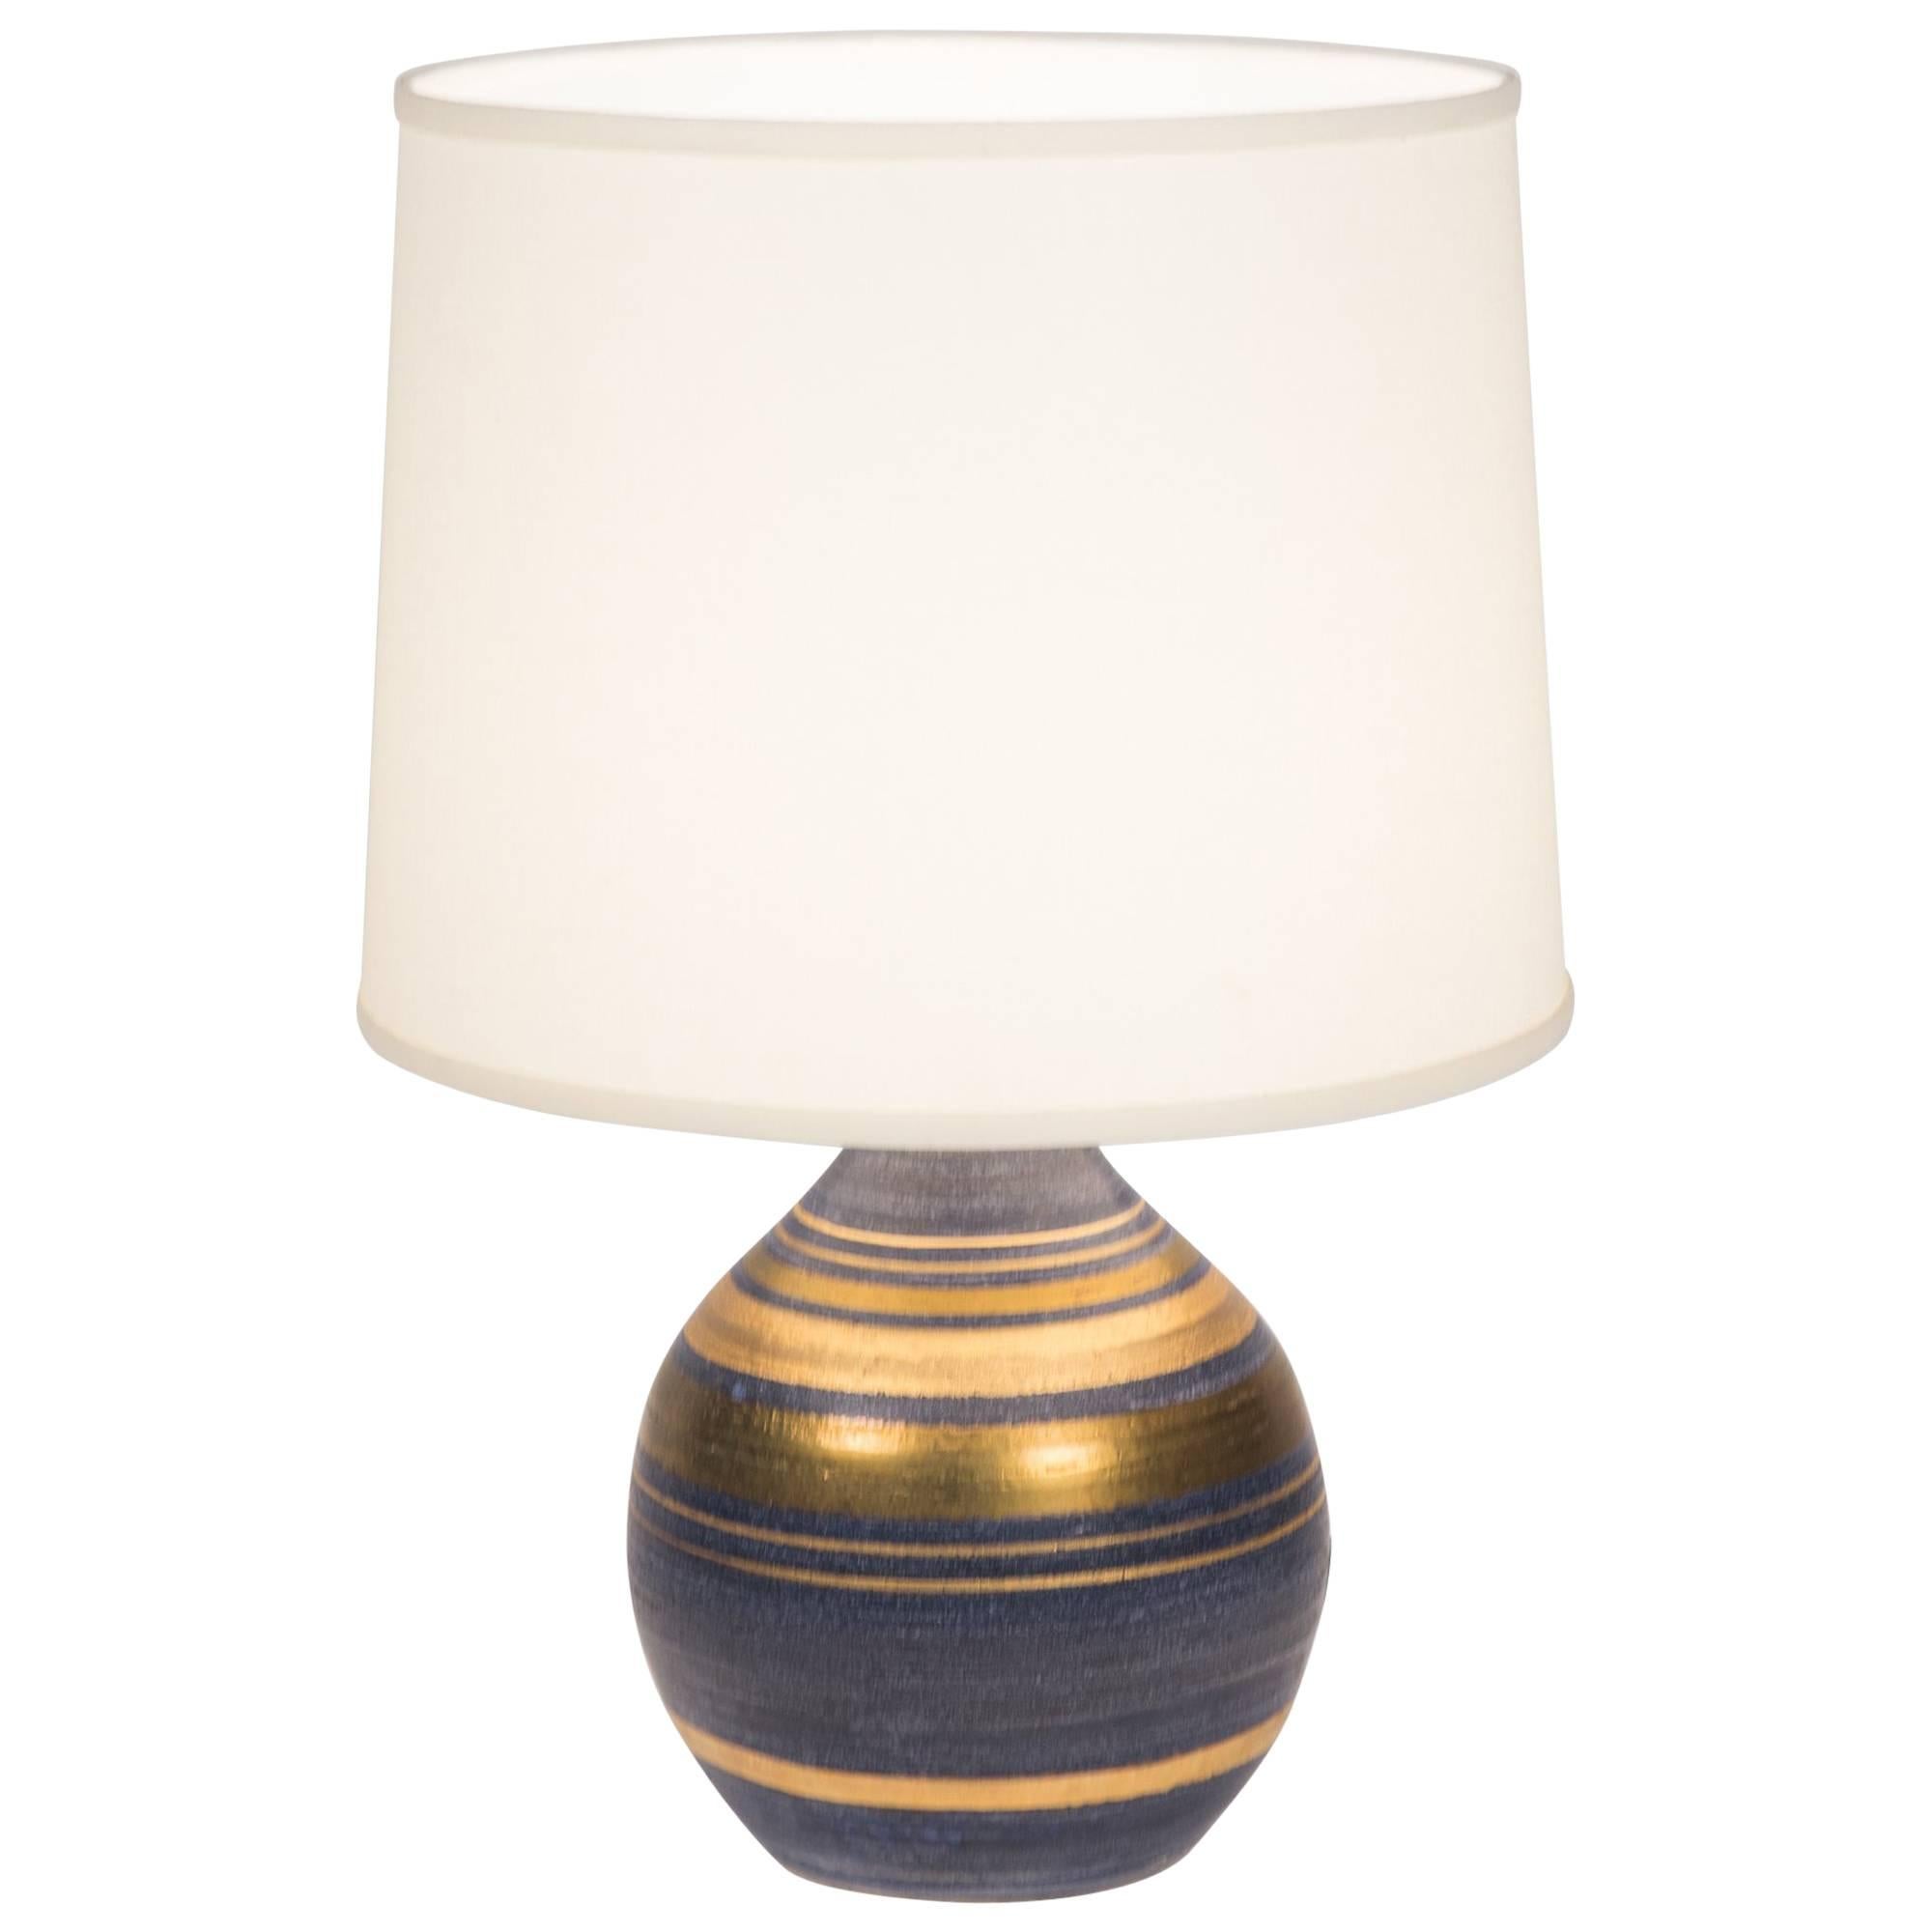 Gold Striped Ceramic Table Lamp, French, 1960s For Sale